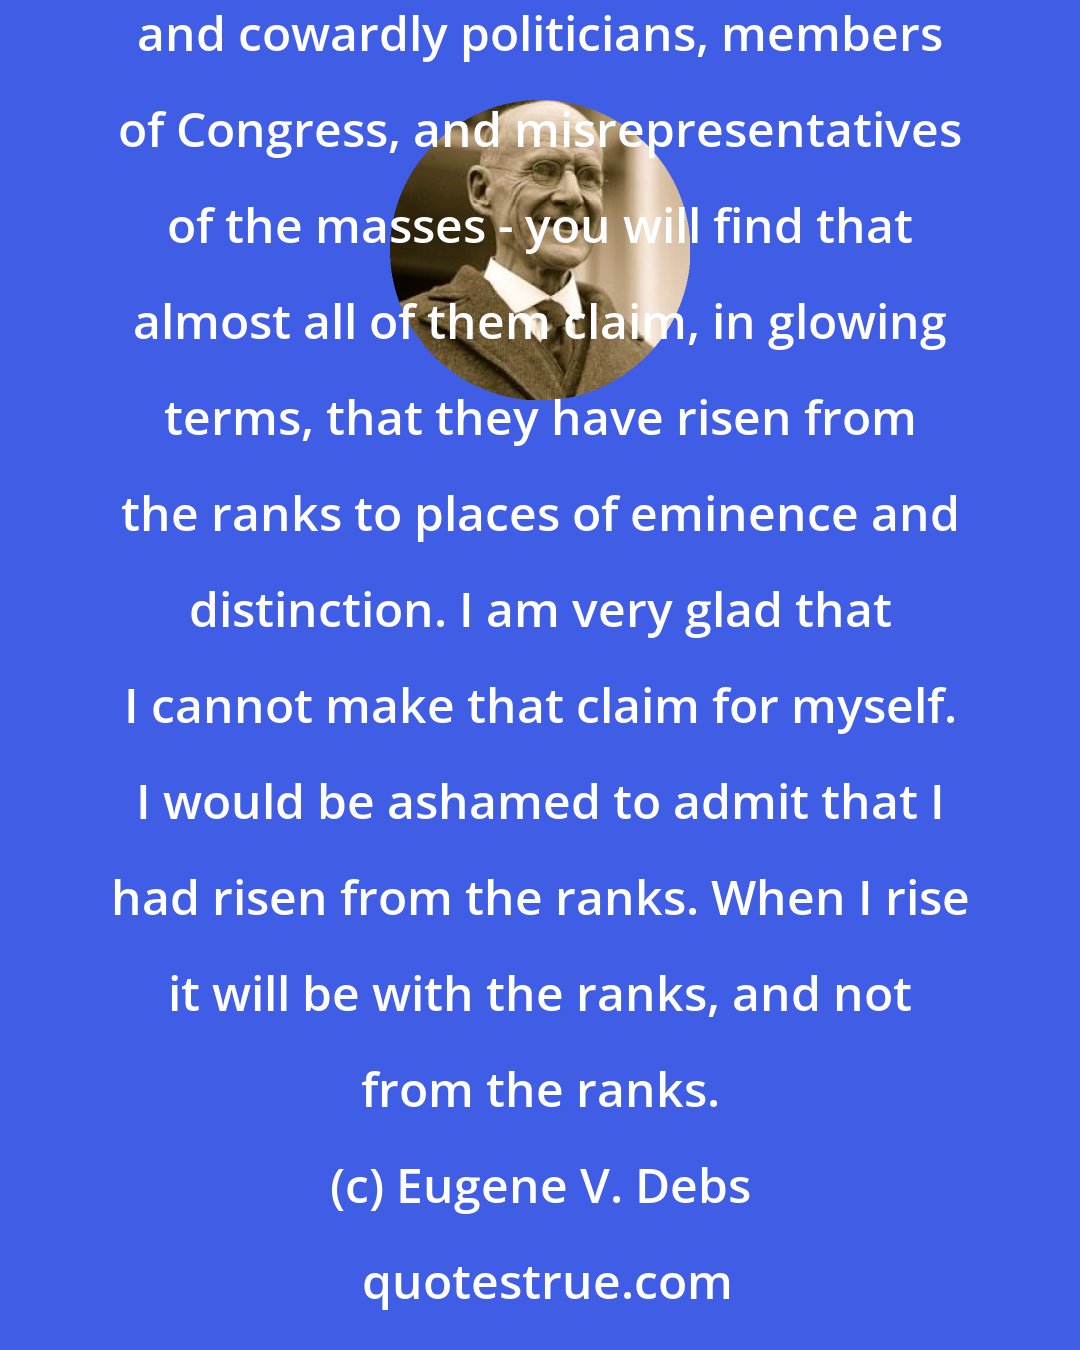 Eugene V. Debs: If you go to the city of Washington,  and you examine the pages of the Congressional Directory, you will find that almost all of those corporation lawyers and cowardly politicians, members of Congress, and misrepresentatives of the masses - you will find that almost all of them claim, in glowing terms, that they have risen from the ranks to places of eminence and distinction. I am very glad that I cannot make that claim for myself. I would be ashamed to admit that I had risen from the ranks. When I rise it will be with the ranks, and not from the ranks.